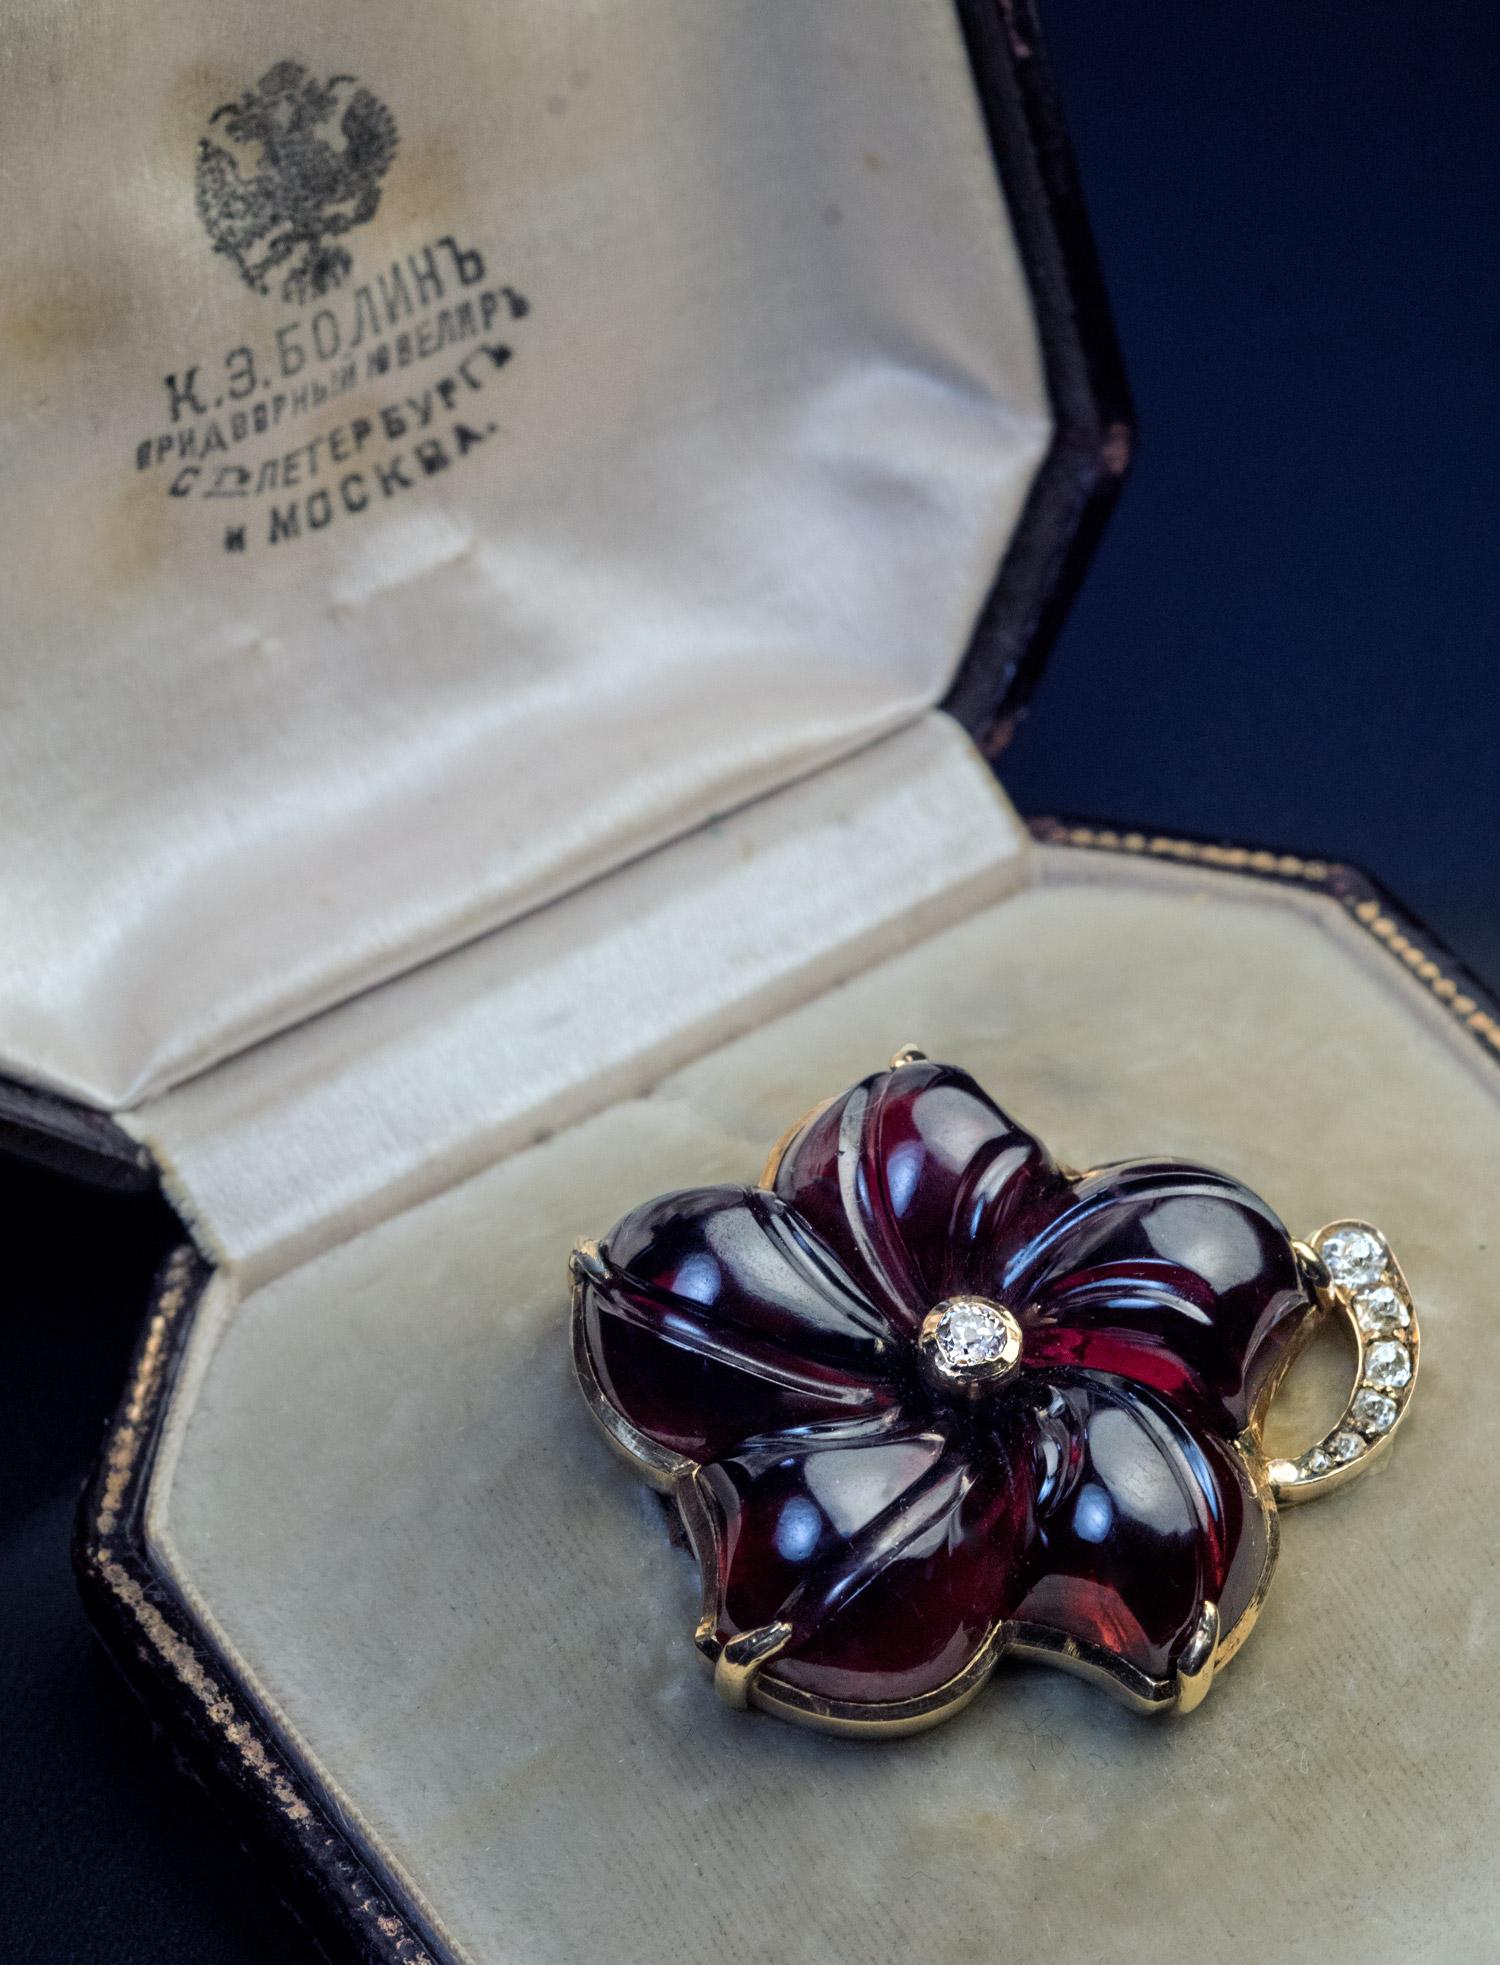 This rare antique brooch by BOLIN, a jeweler of the Russian Imperial court, was made in St. Petersburg in the 1890s.

The brooch is designed as a finely carved almandine garnet flower set is 14K gold and accented with old mine cut diamonds.

Marked